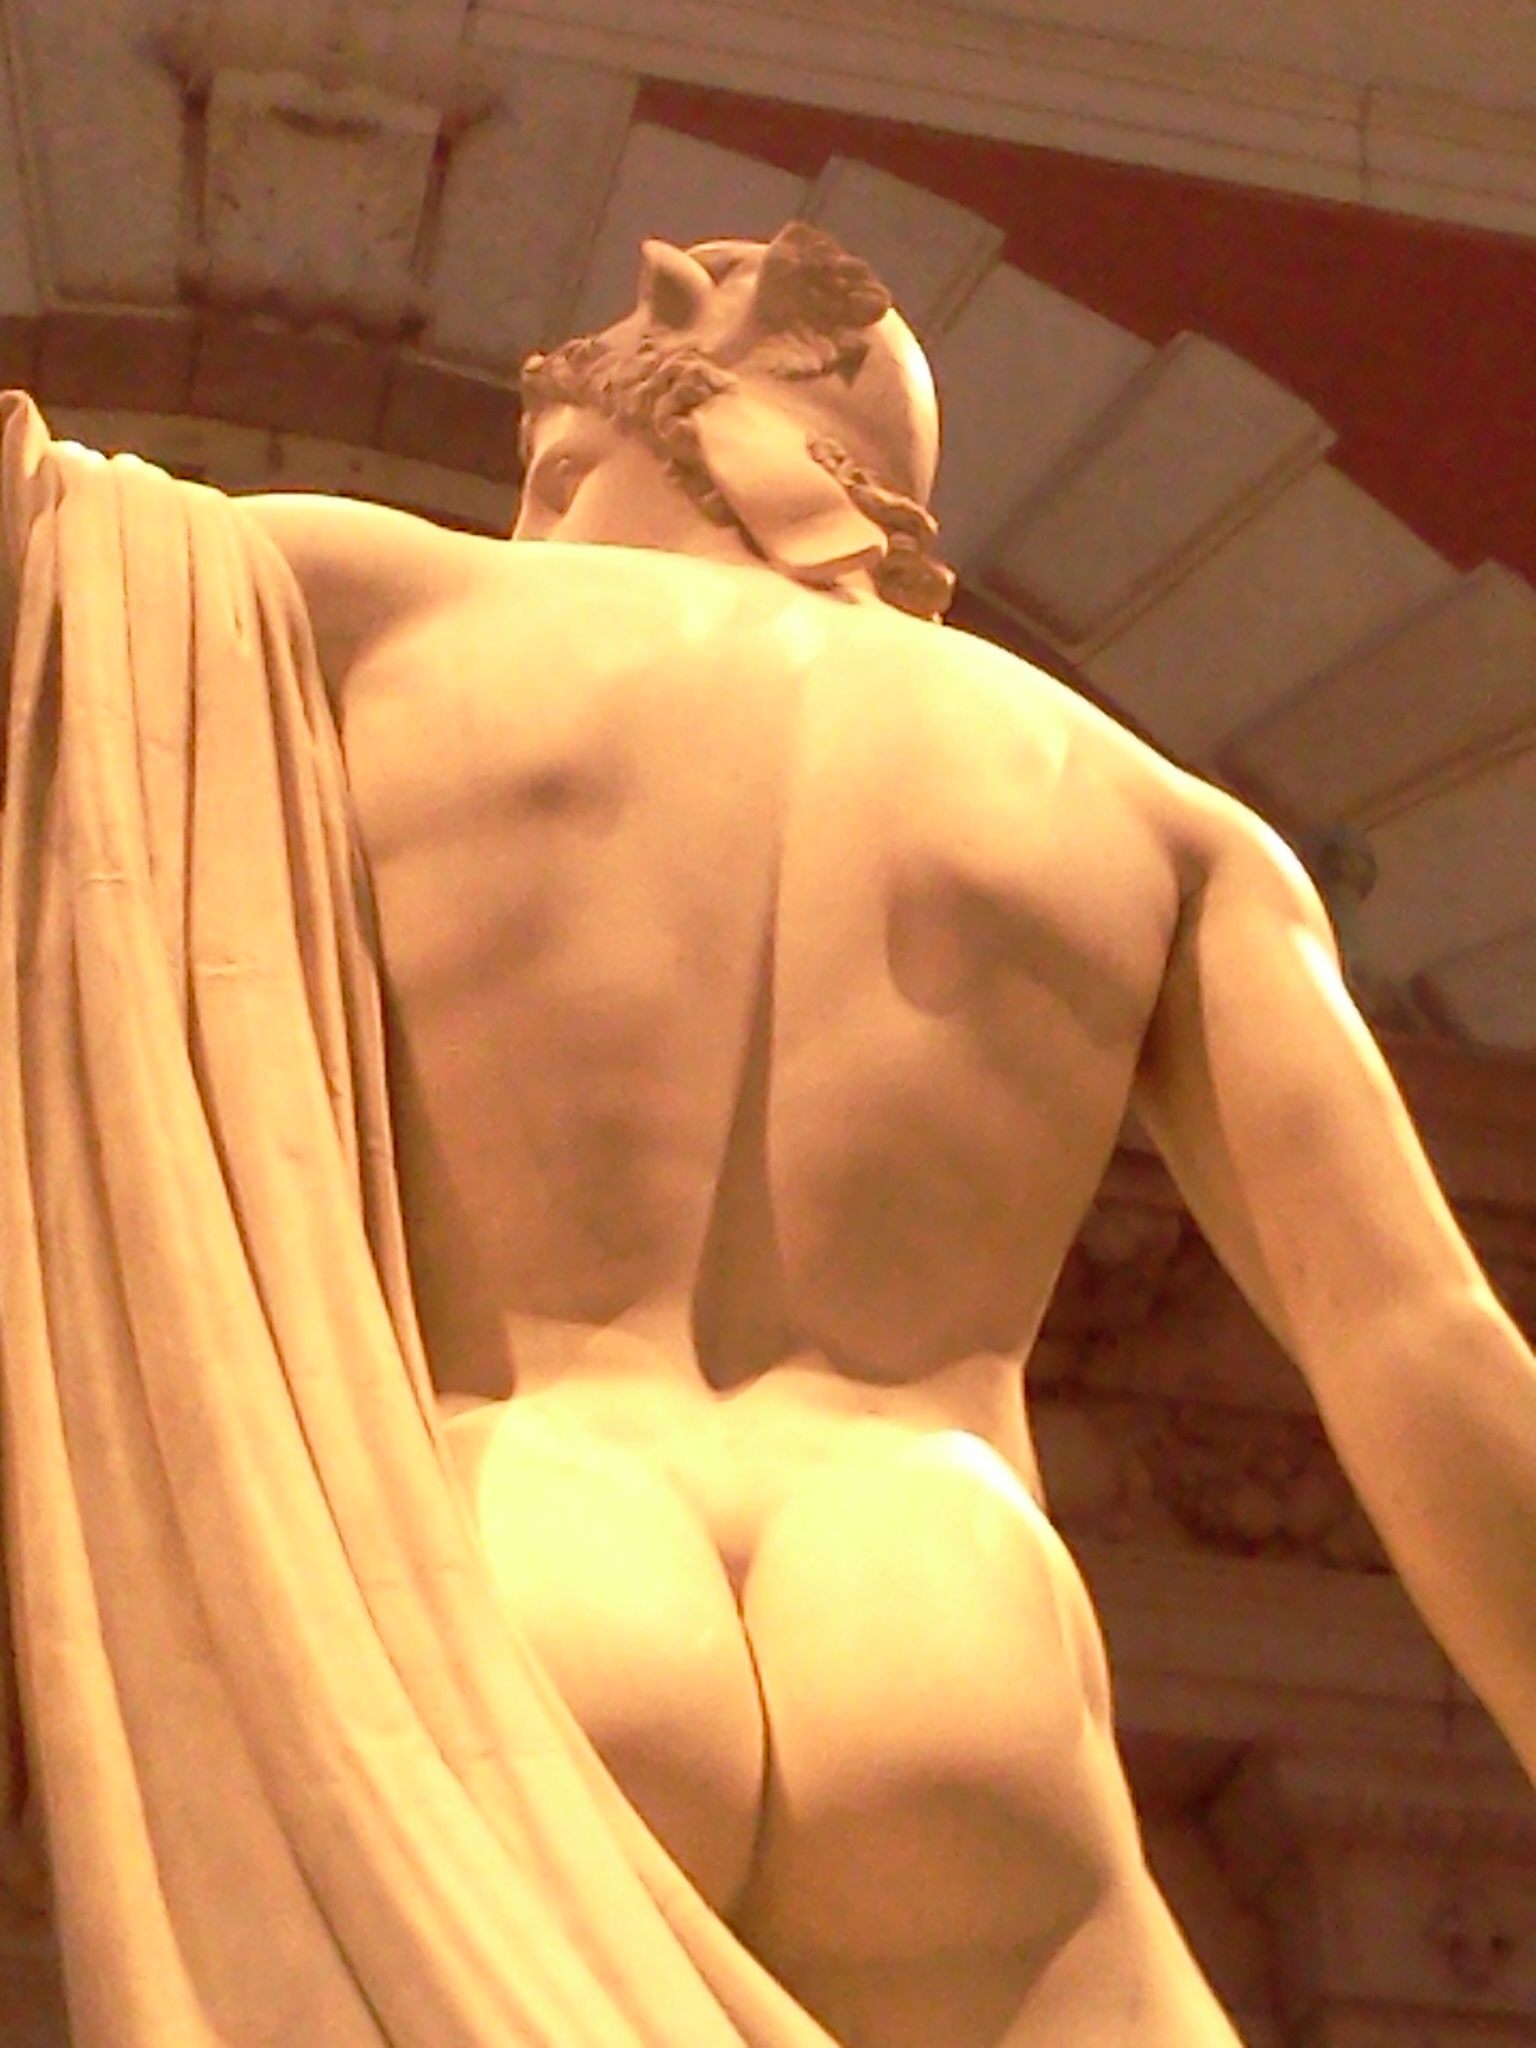 Perseus with the Head of Medusa - back view